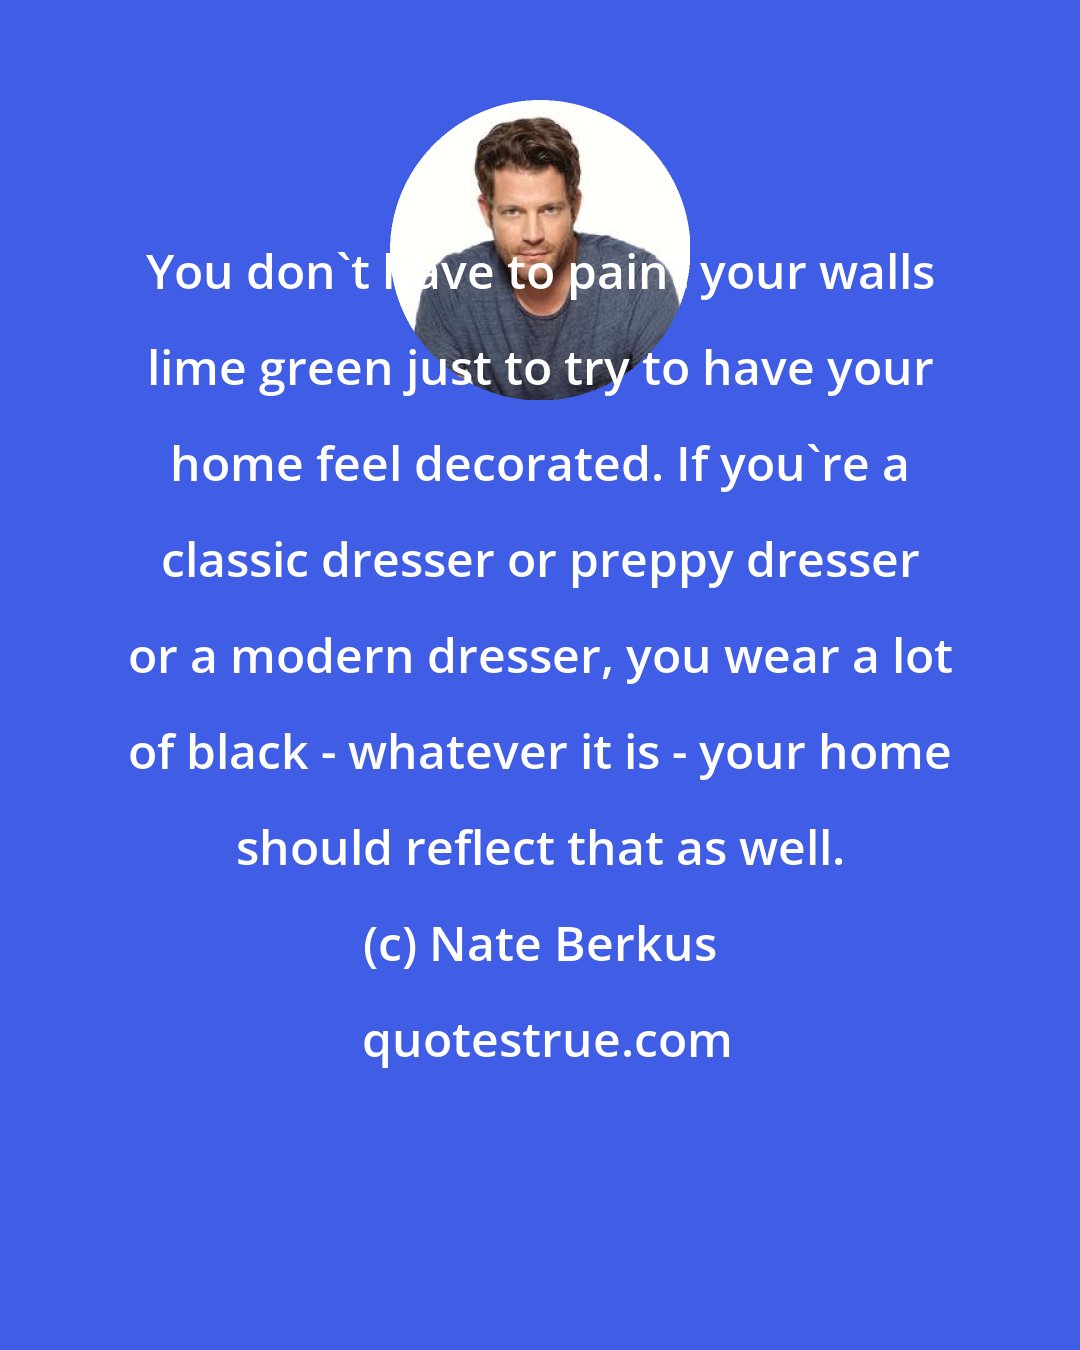 Nate Berkus: You don't have to paint your walls lime green just to try to have your home feel decorated. If you're a classic dresser or preppy dresser or a modern dresser, you wear a lot of black - whatever it is - your home should reflect that as well.